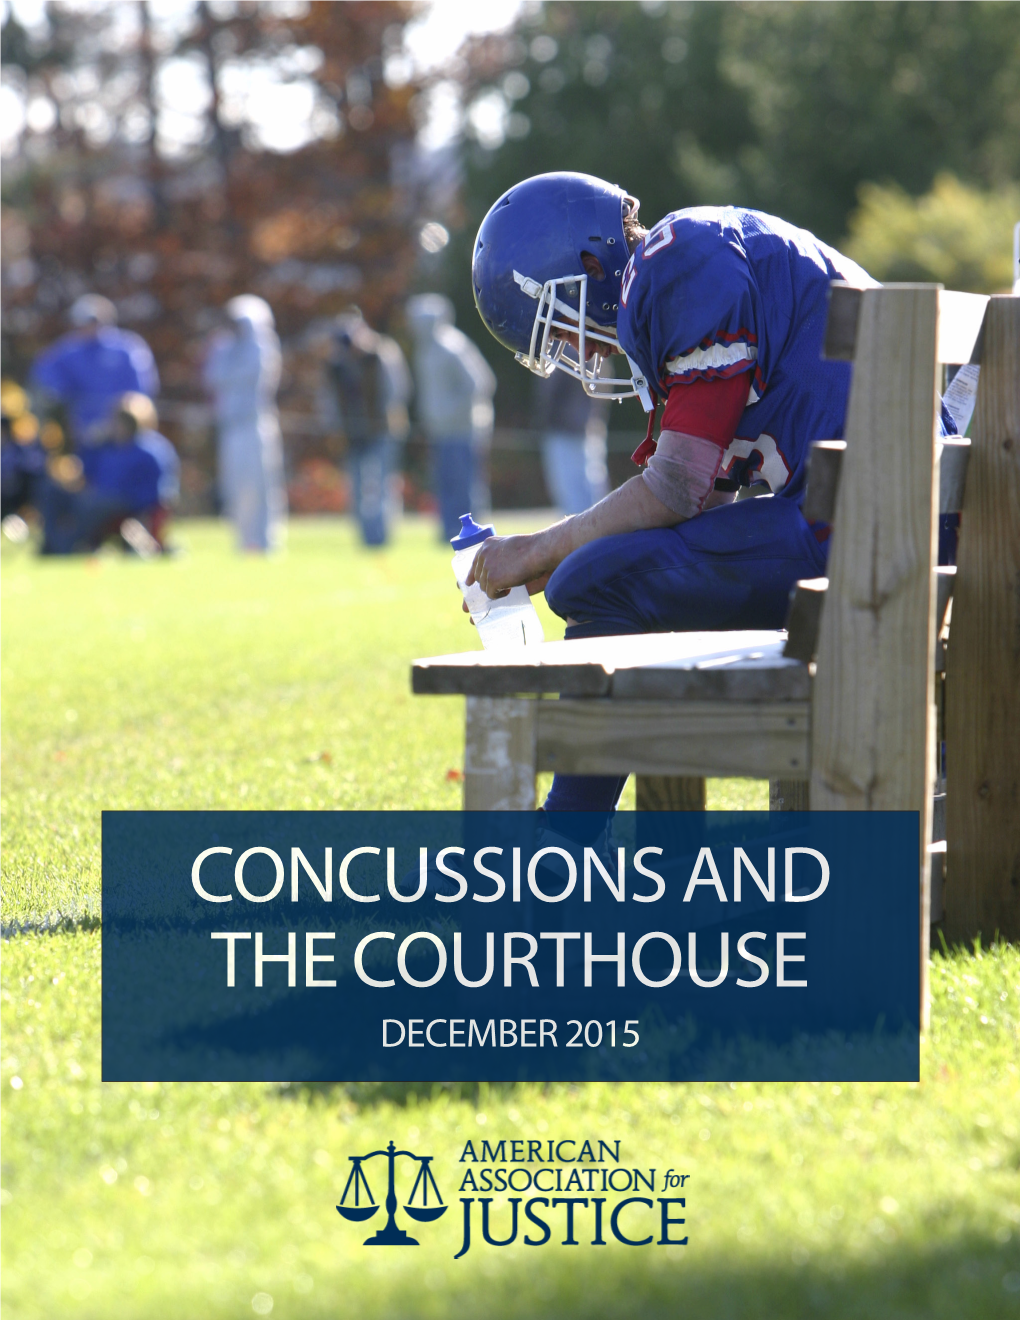 Concussions and the Courthouse